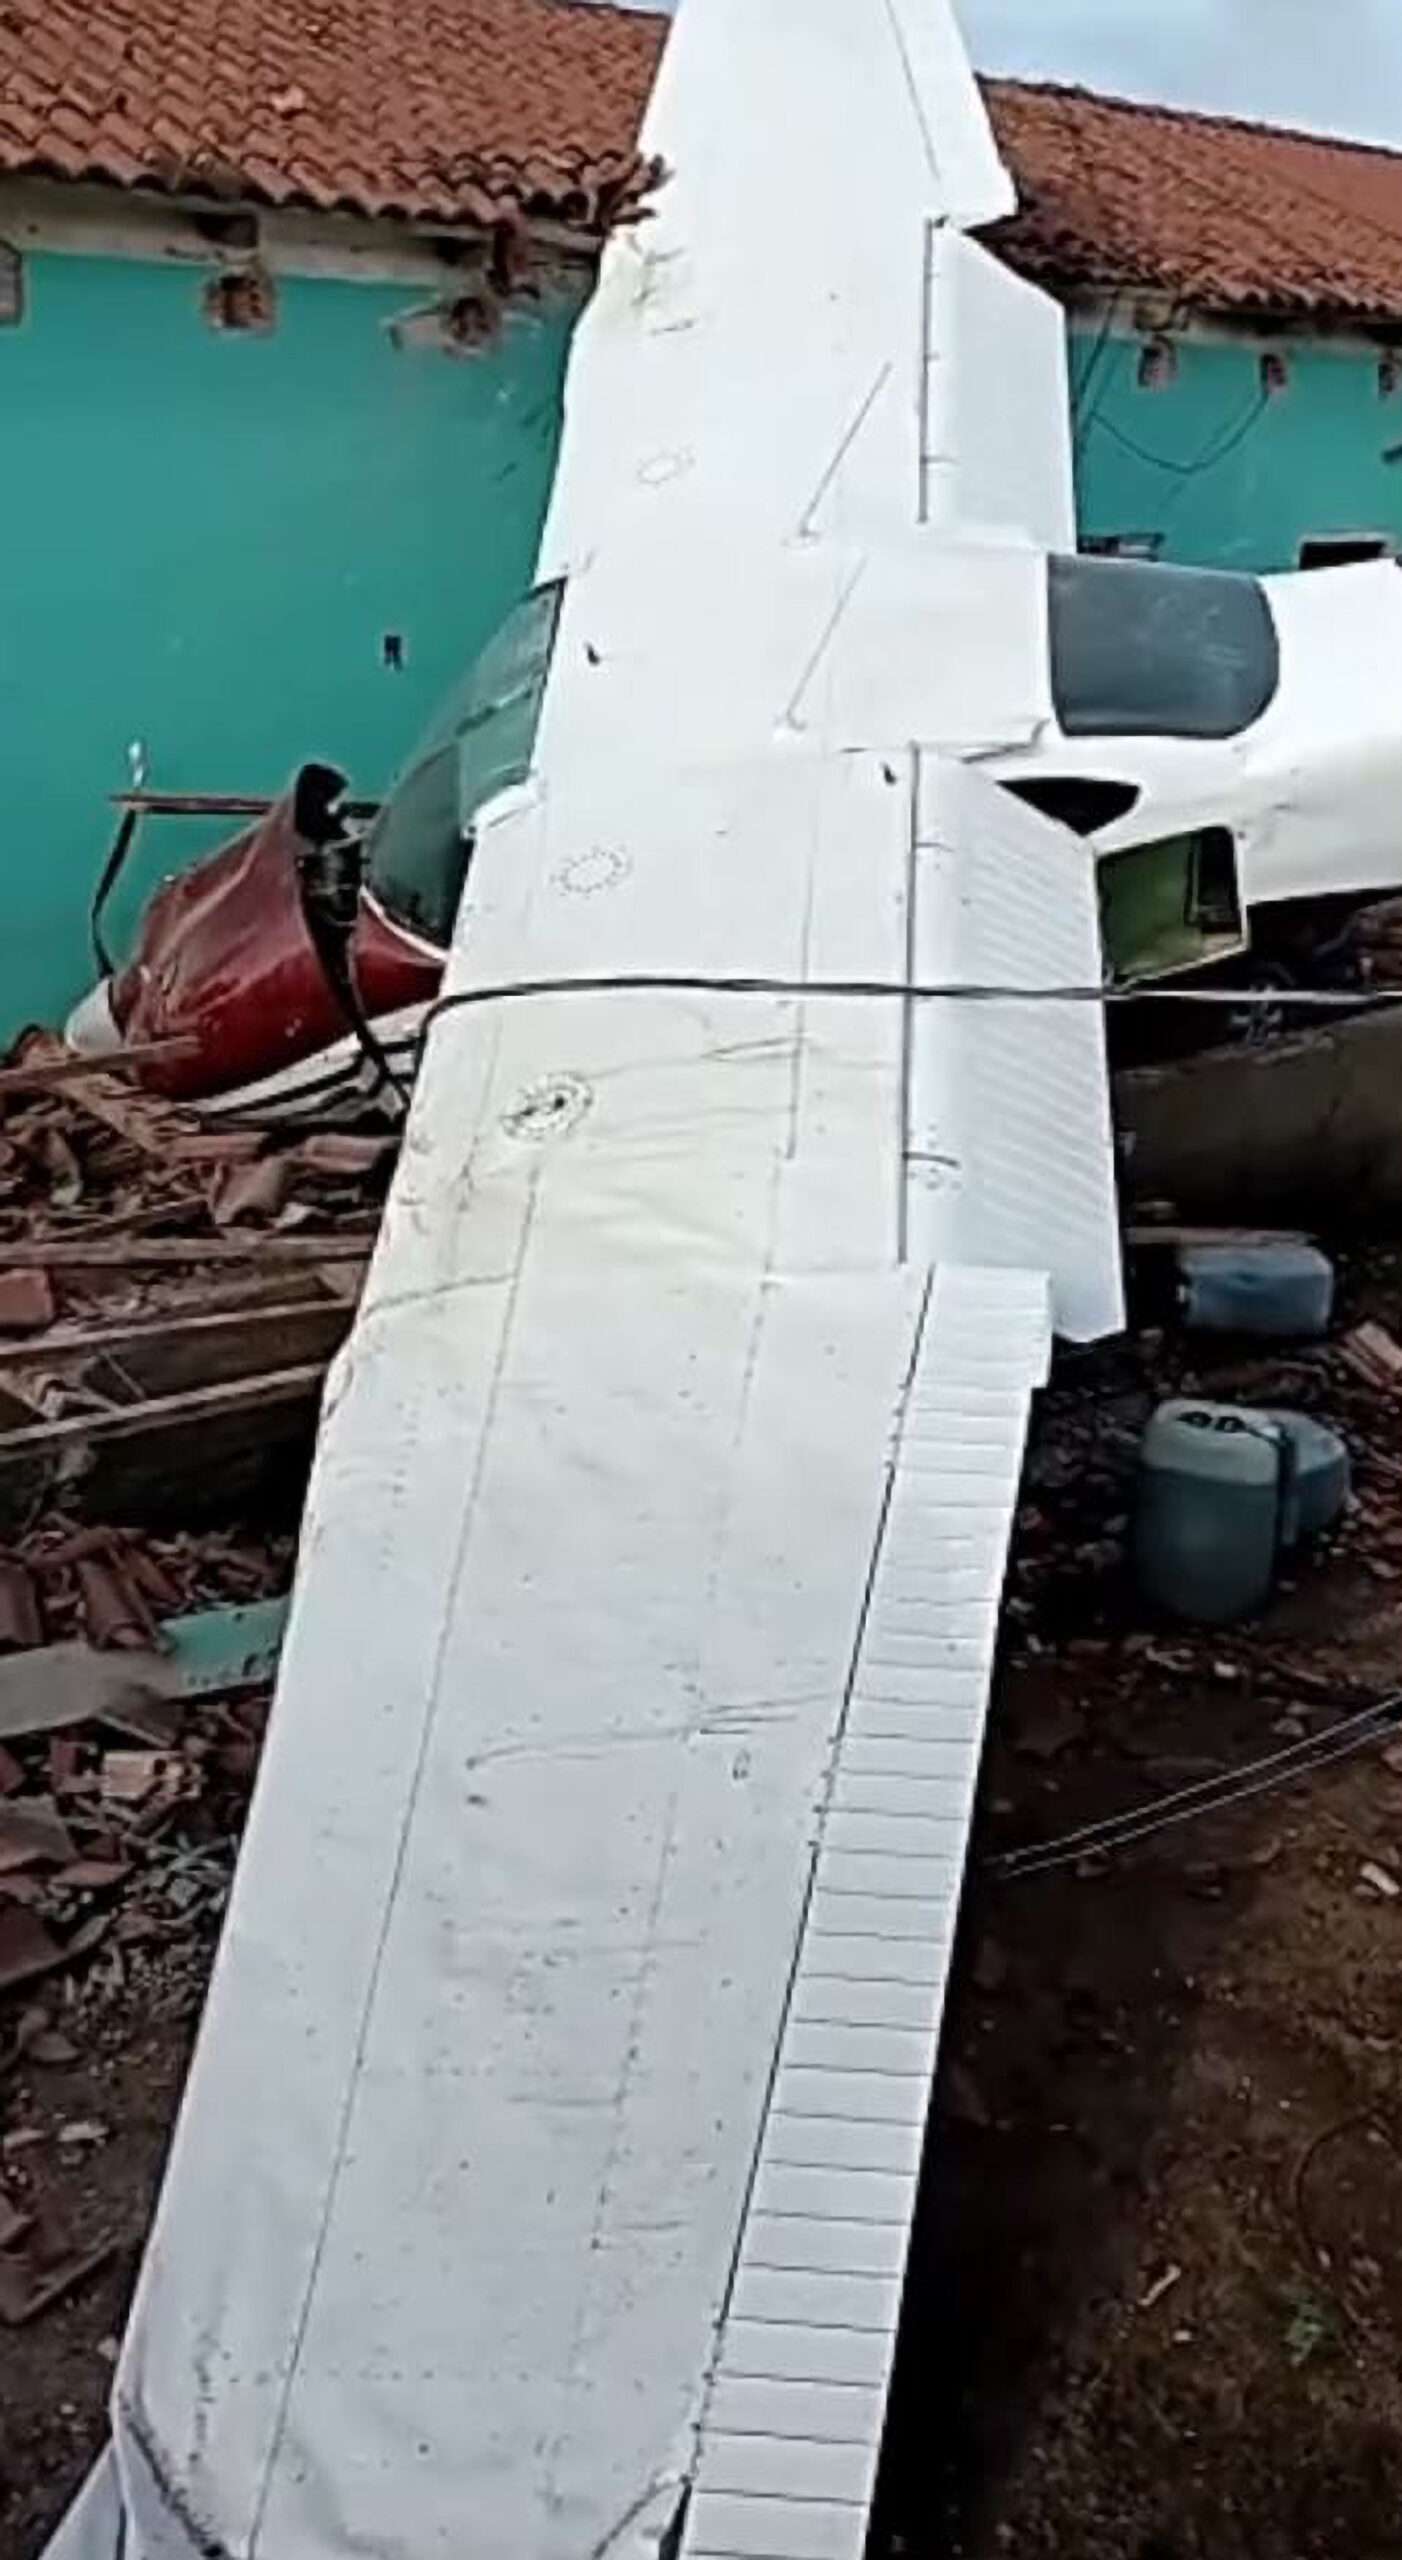 Read more about the article HOUSE ABOUT THAT FOR LUCKY? Pilot Crashes Into House And Survives